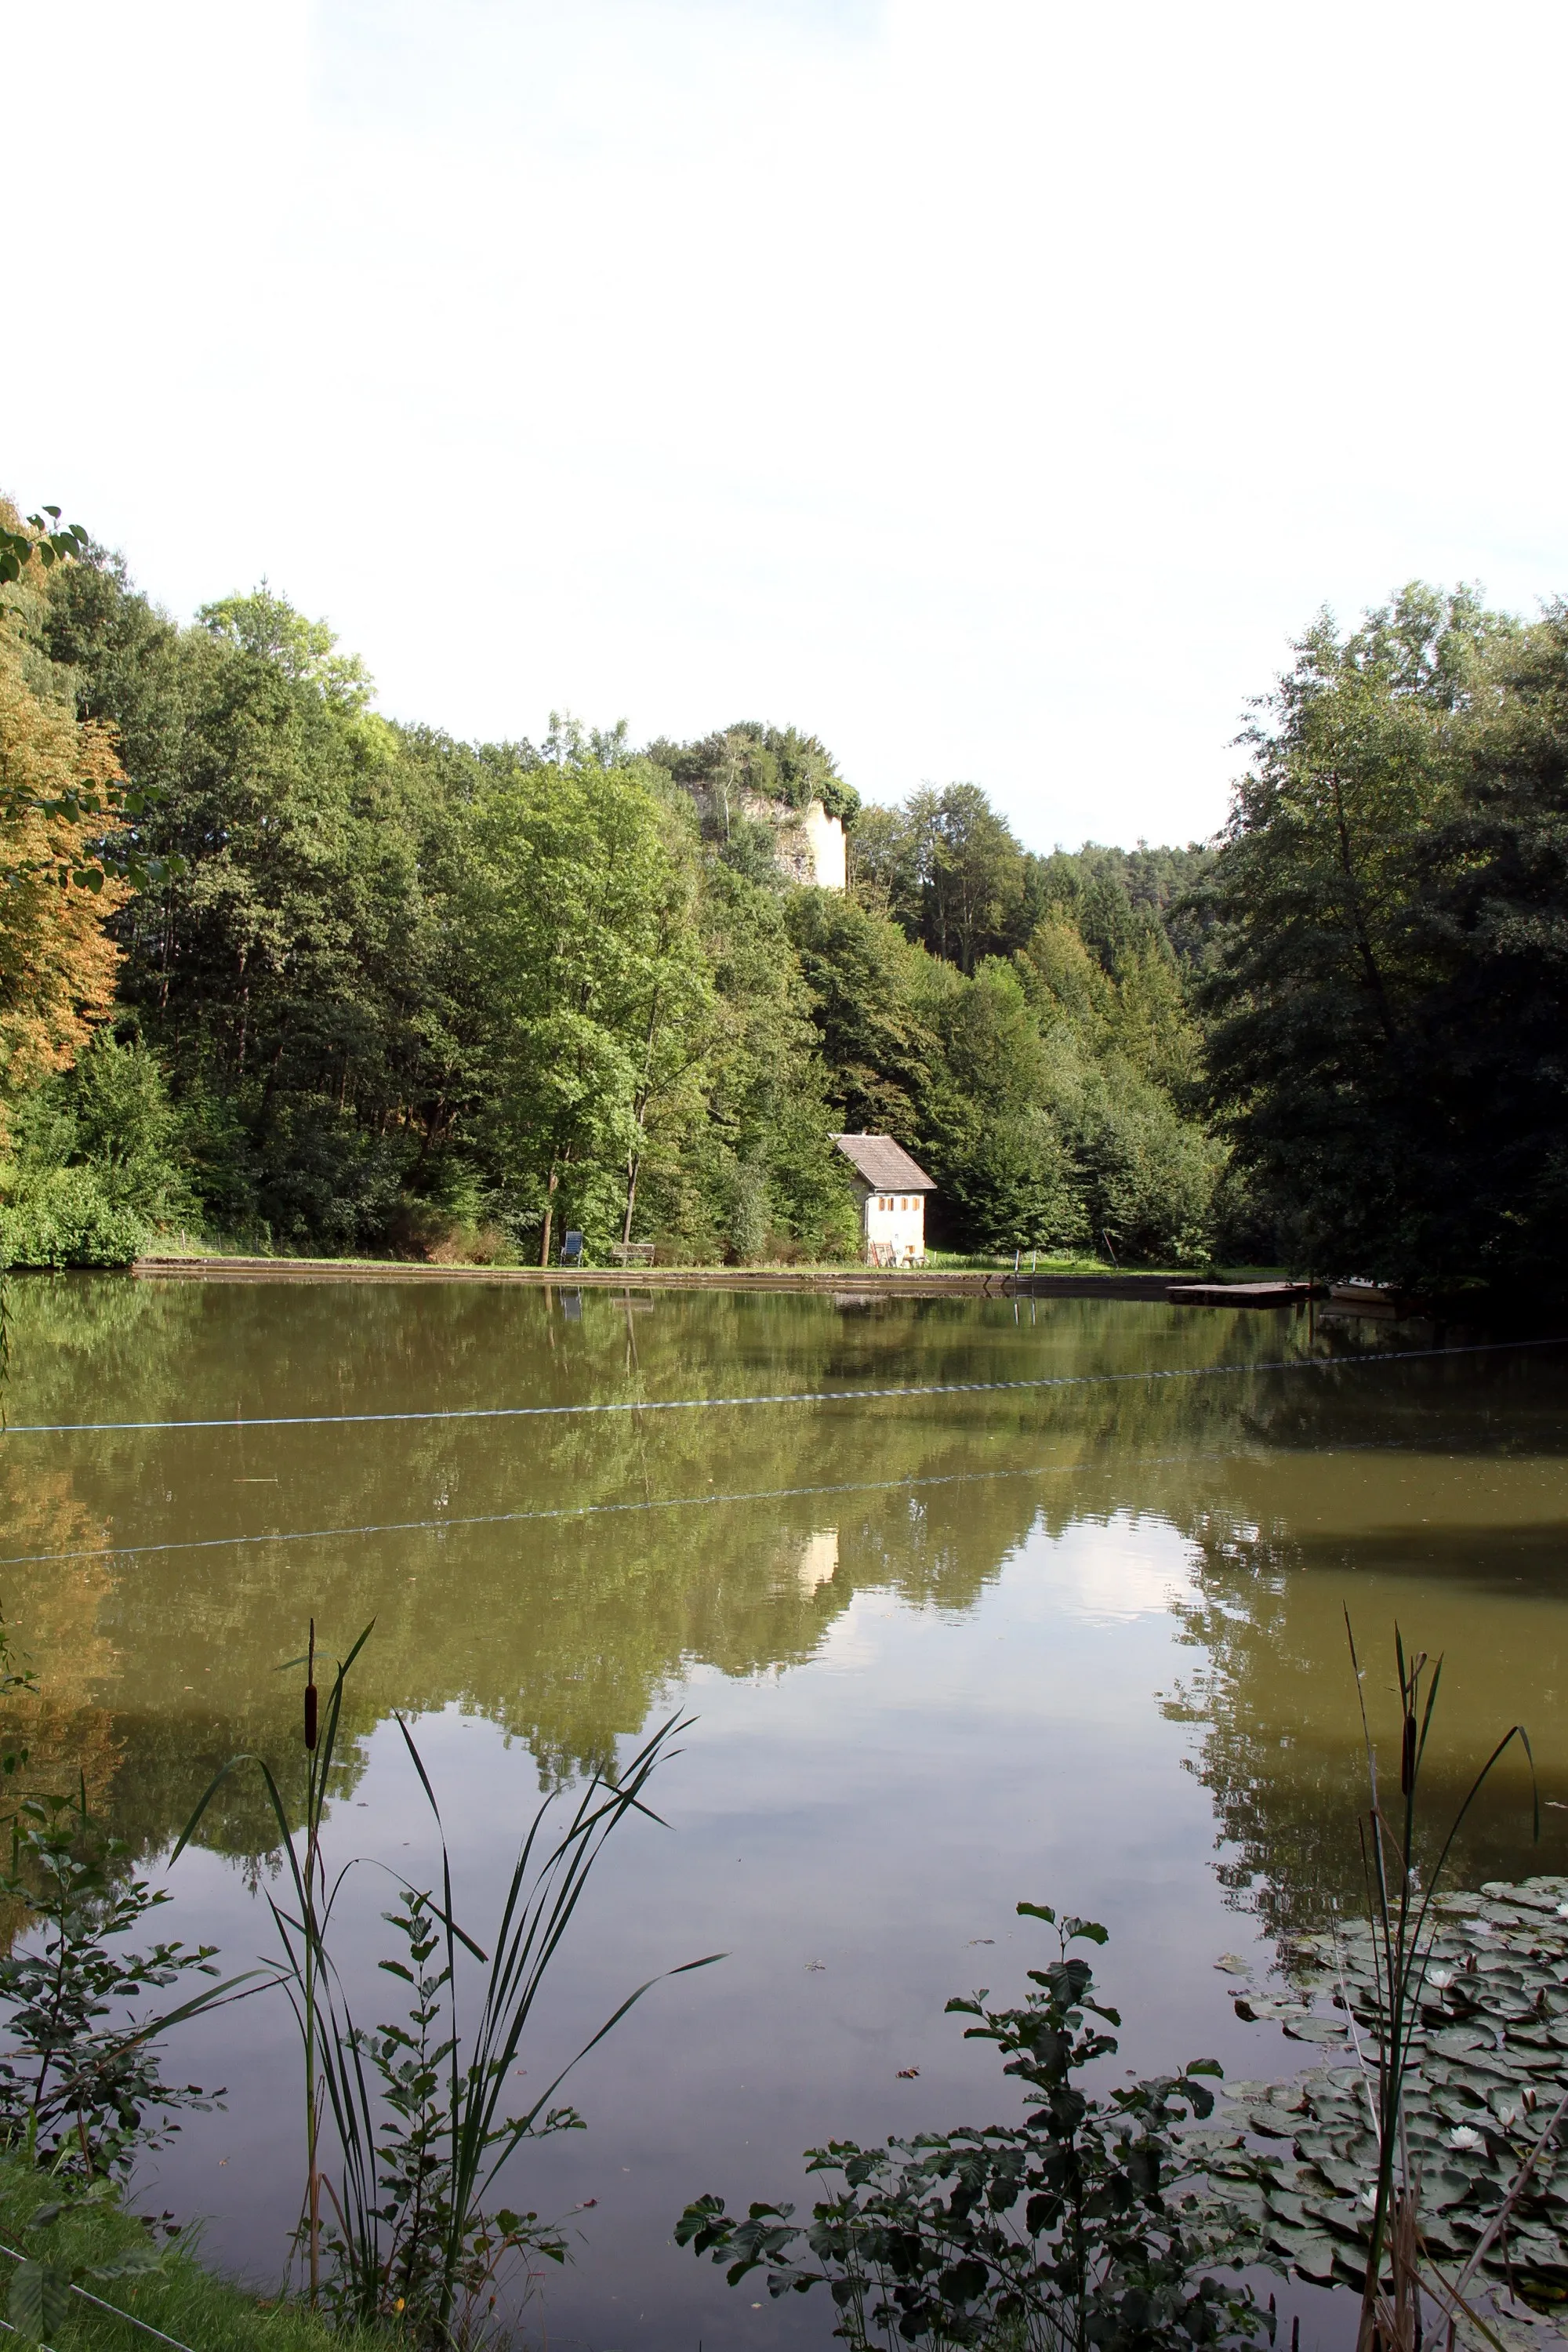 Photo showing: Municipality Hollenthon in Lower Austria. – The photo shows the castle pond in Stickelberg.